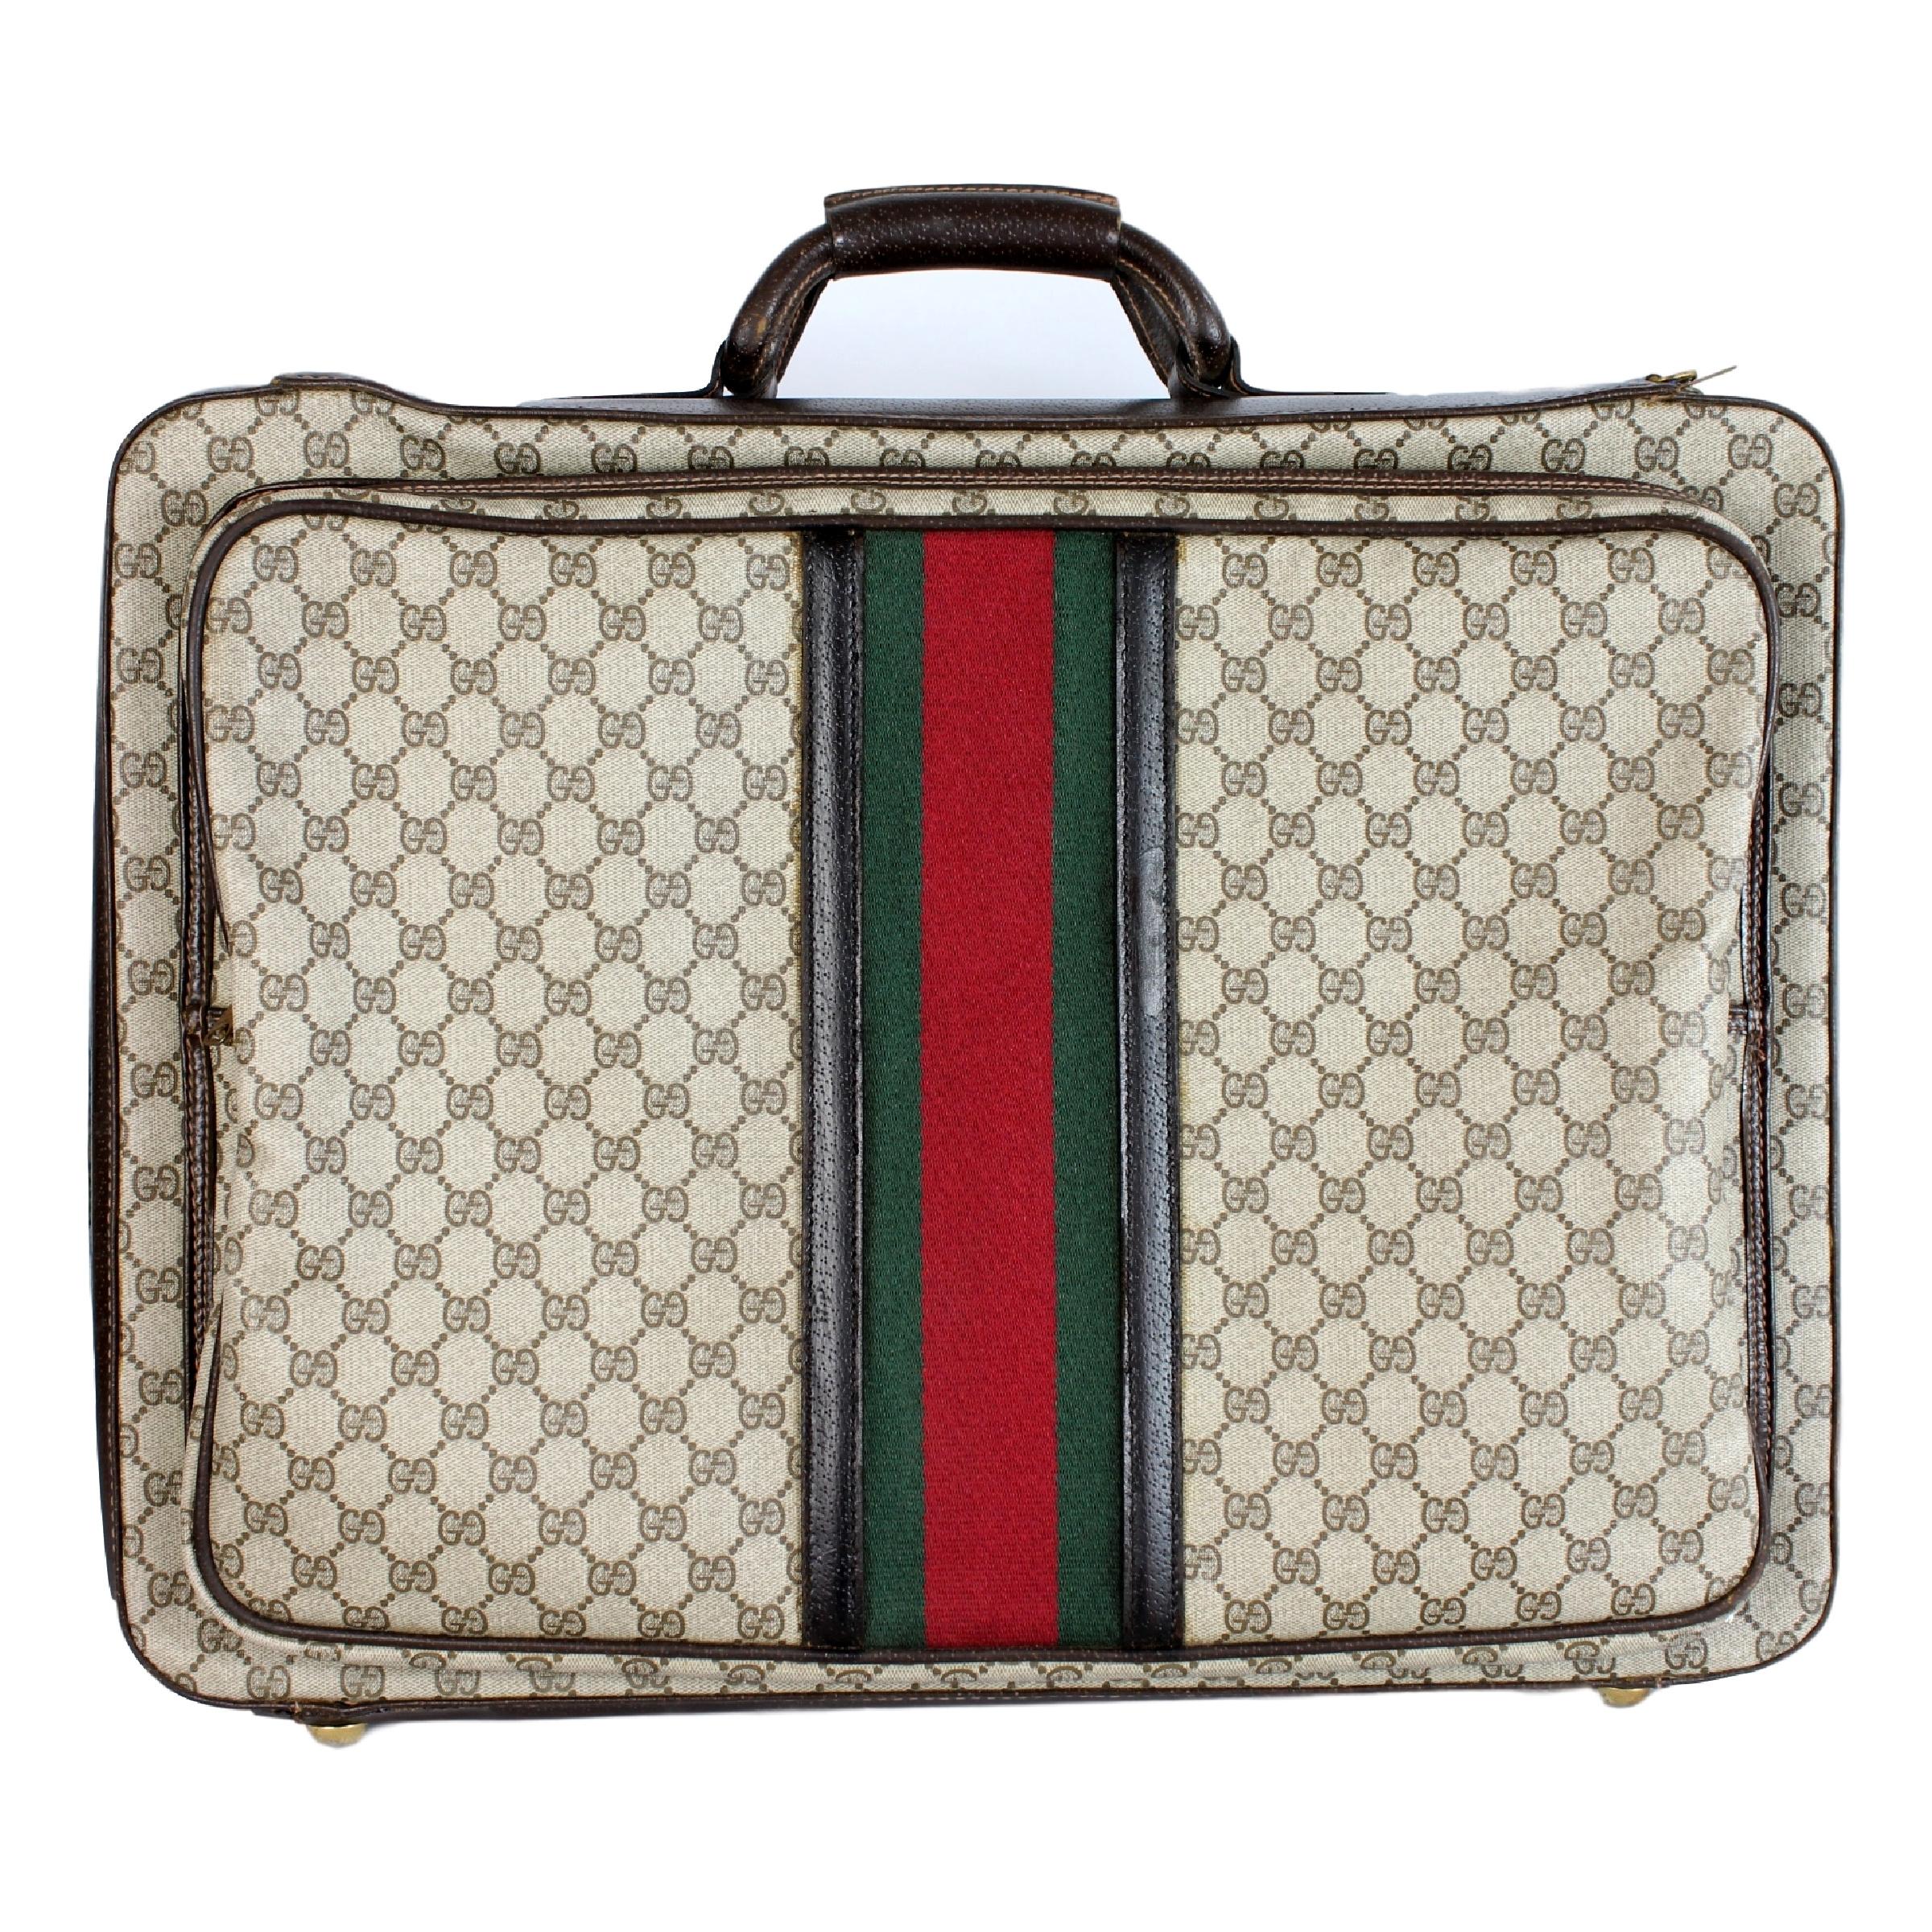 1980s Gucci Monogram Beige Leather Suitcase Luggage Bag